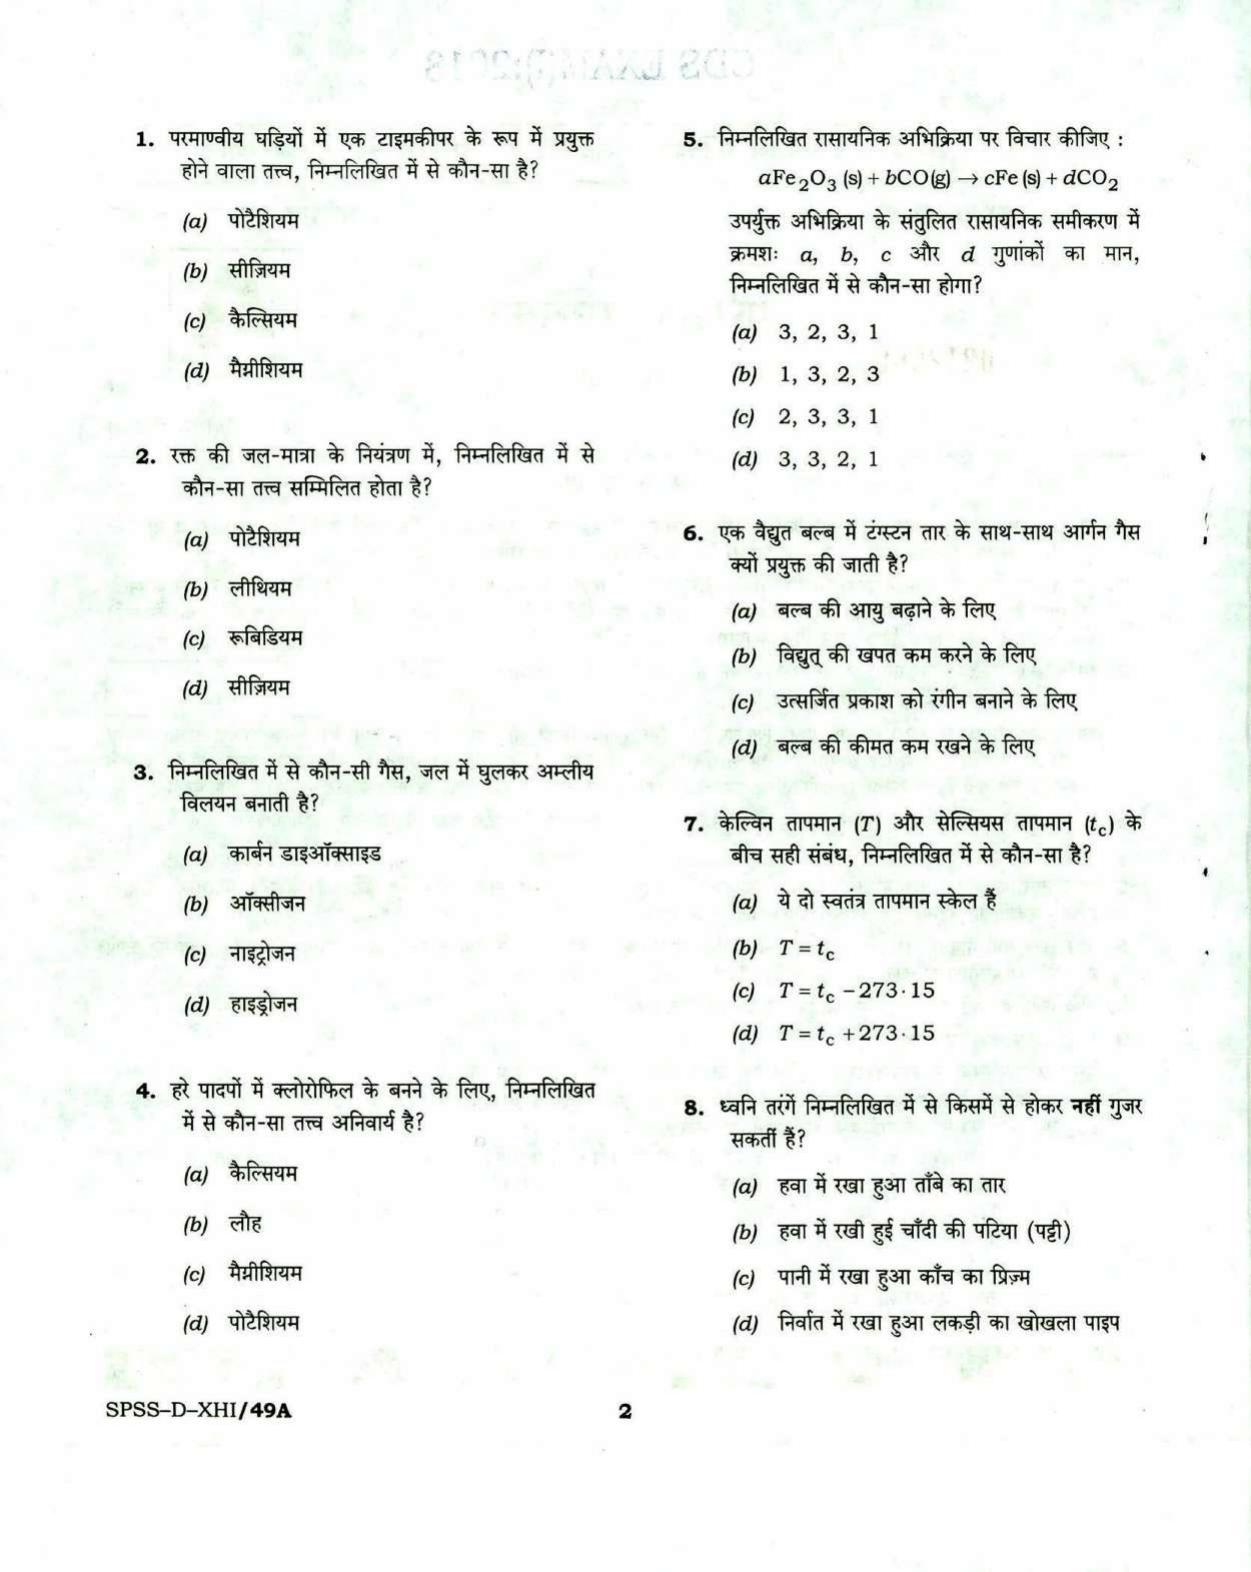 PBSSD General Knowledge Solved Papers - Page 2